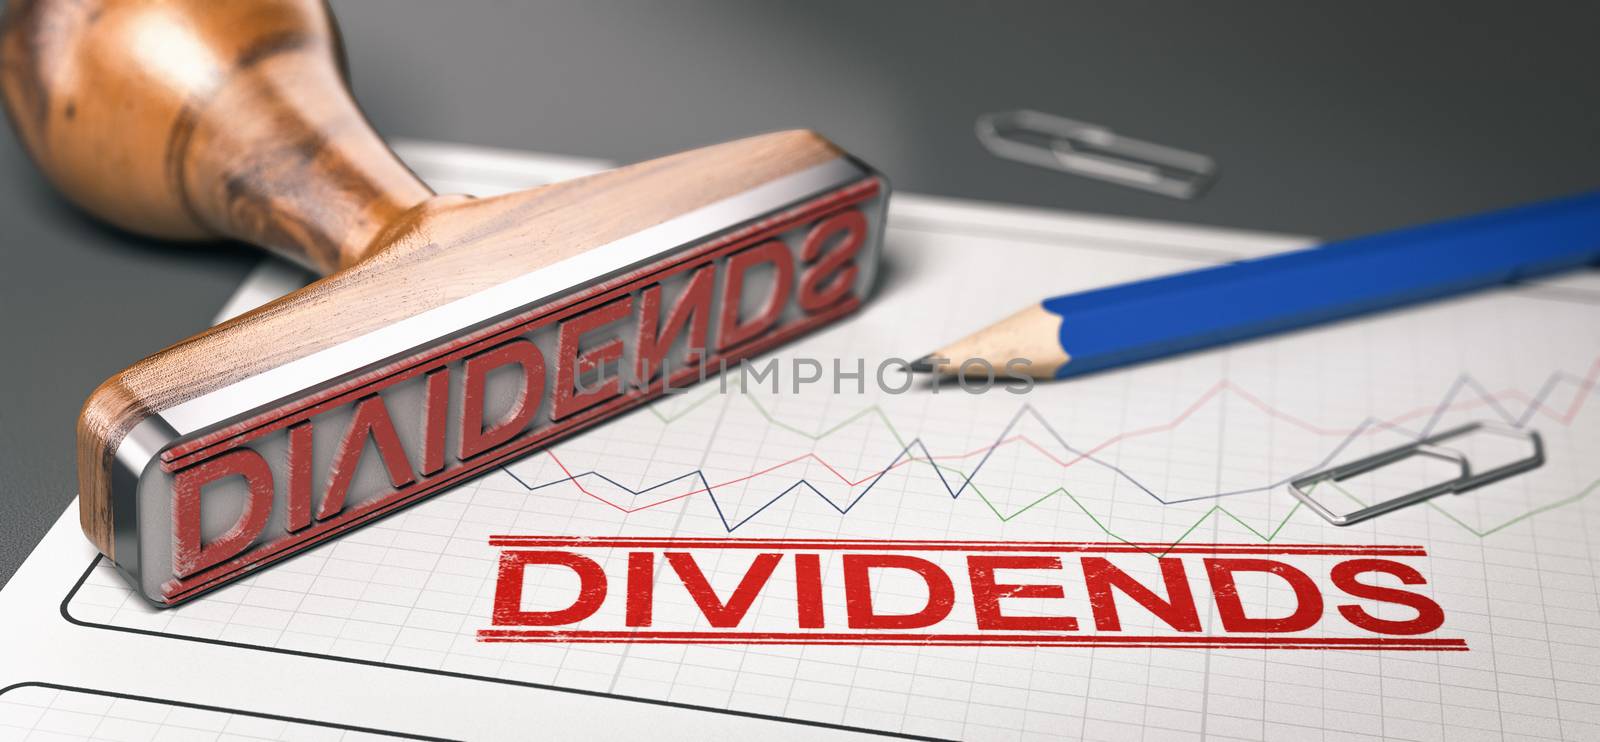  Dividends, distribution of profits by a corporation to sharehol by Olivier-Le-Moal